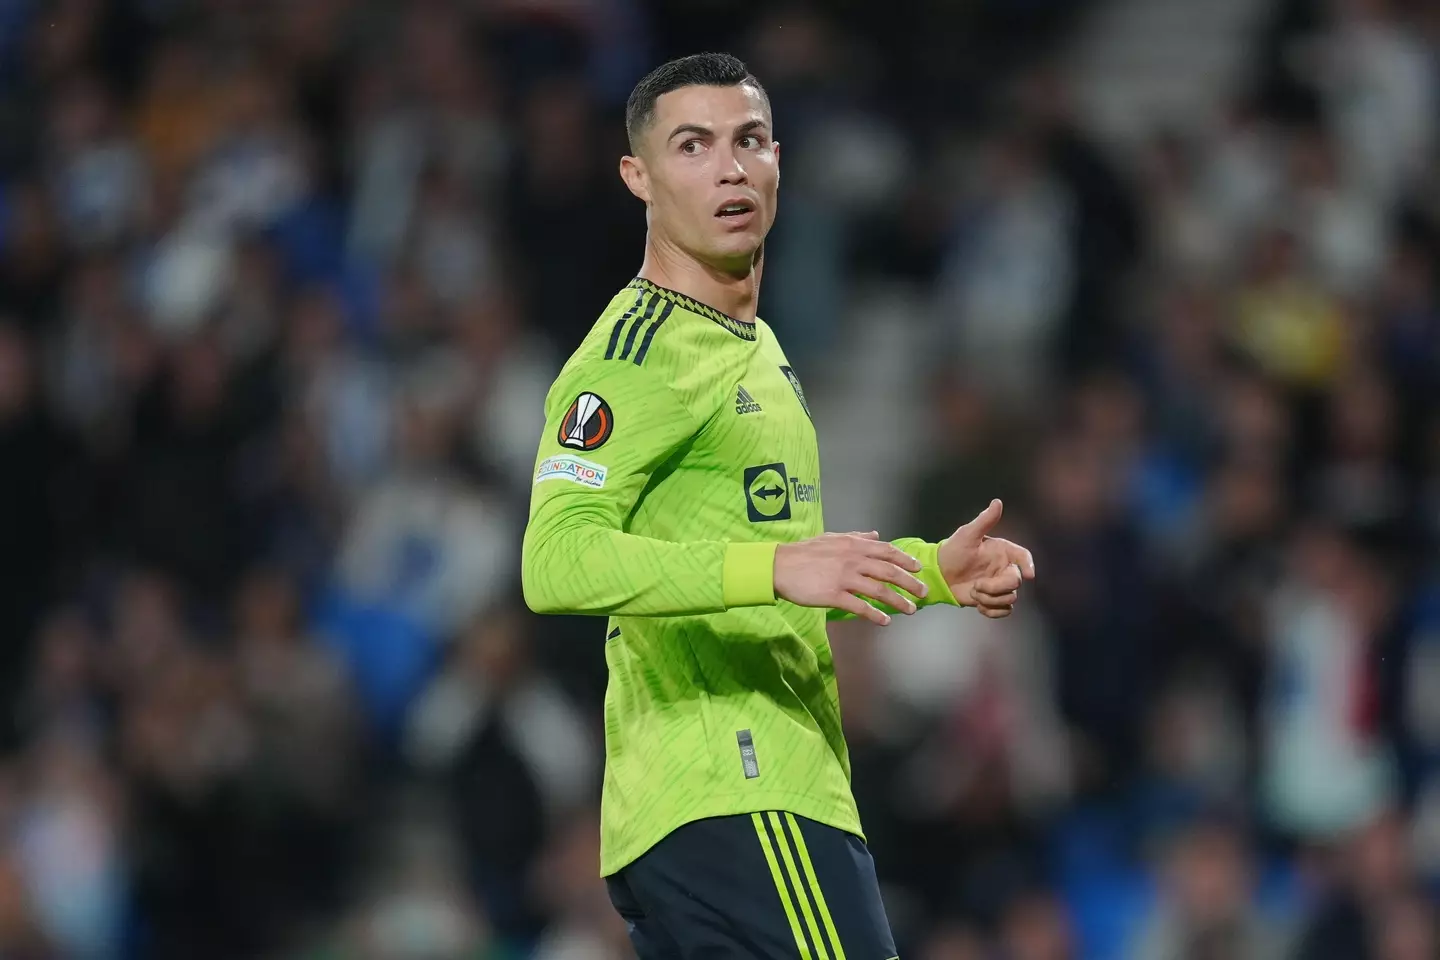 Manchester United legend Cristiano Ronaldo has rocked the footballing world with his bombshell interview with Piers Morgan.